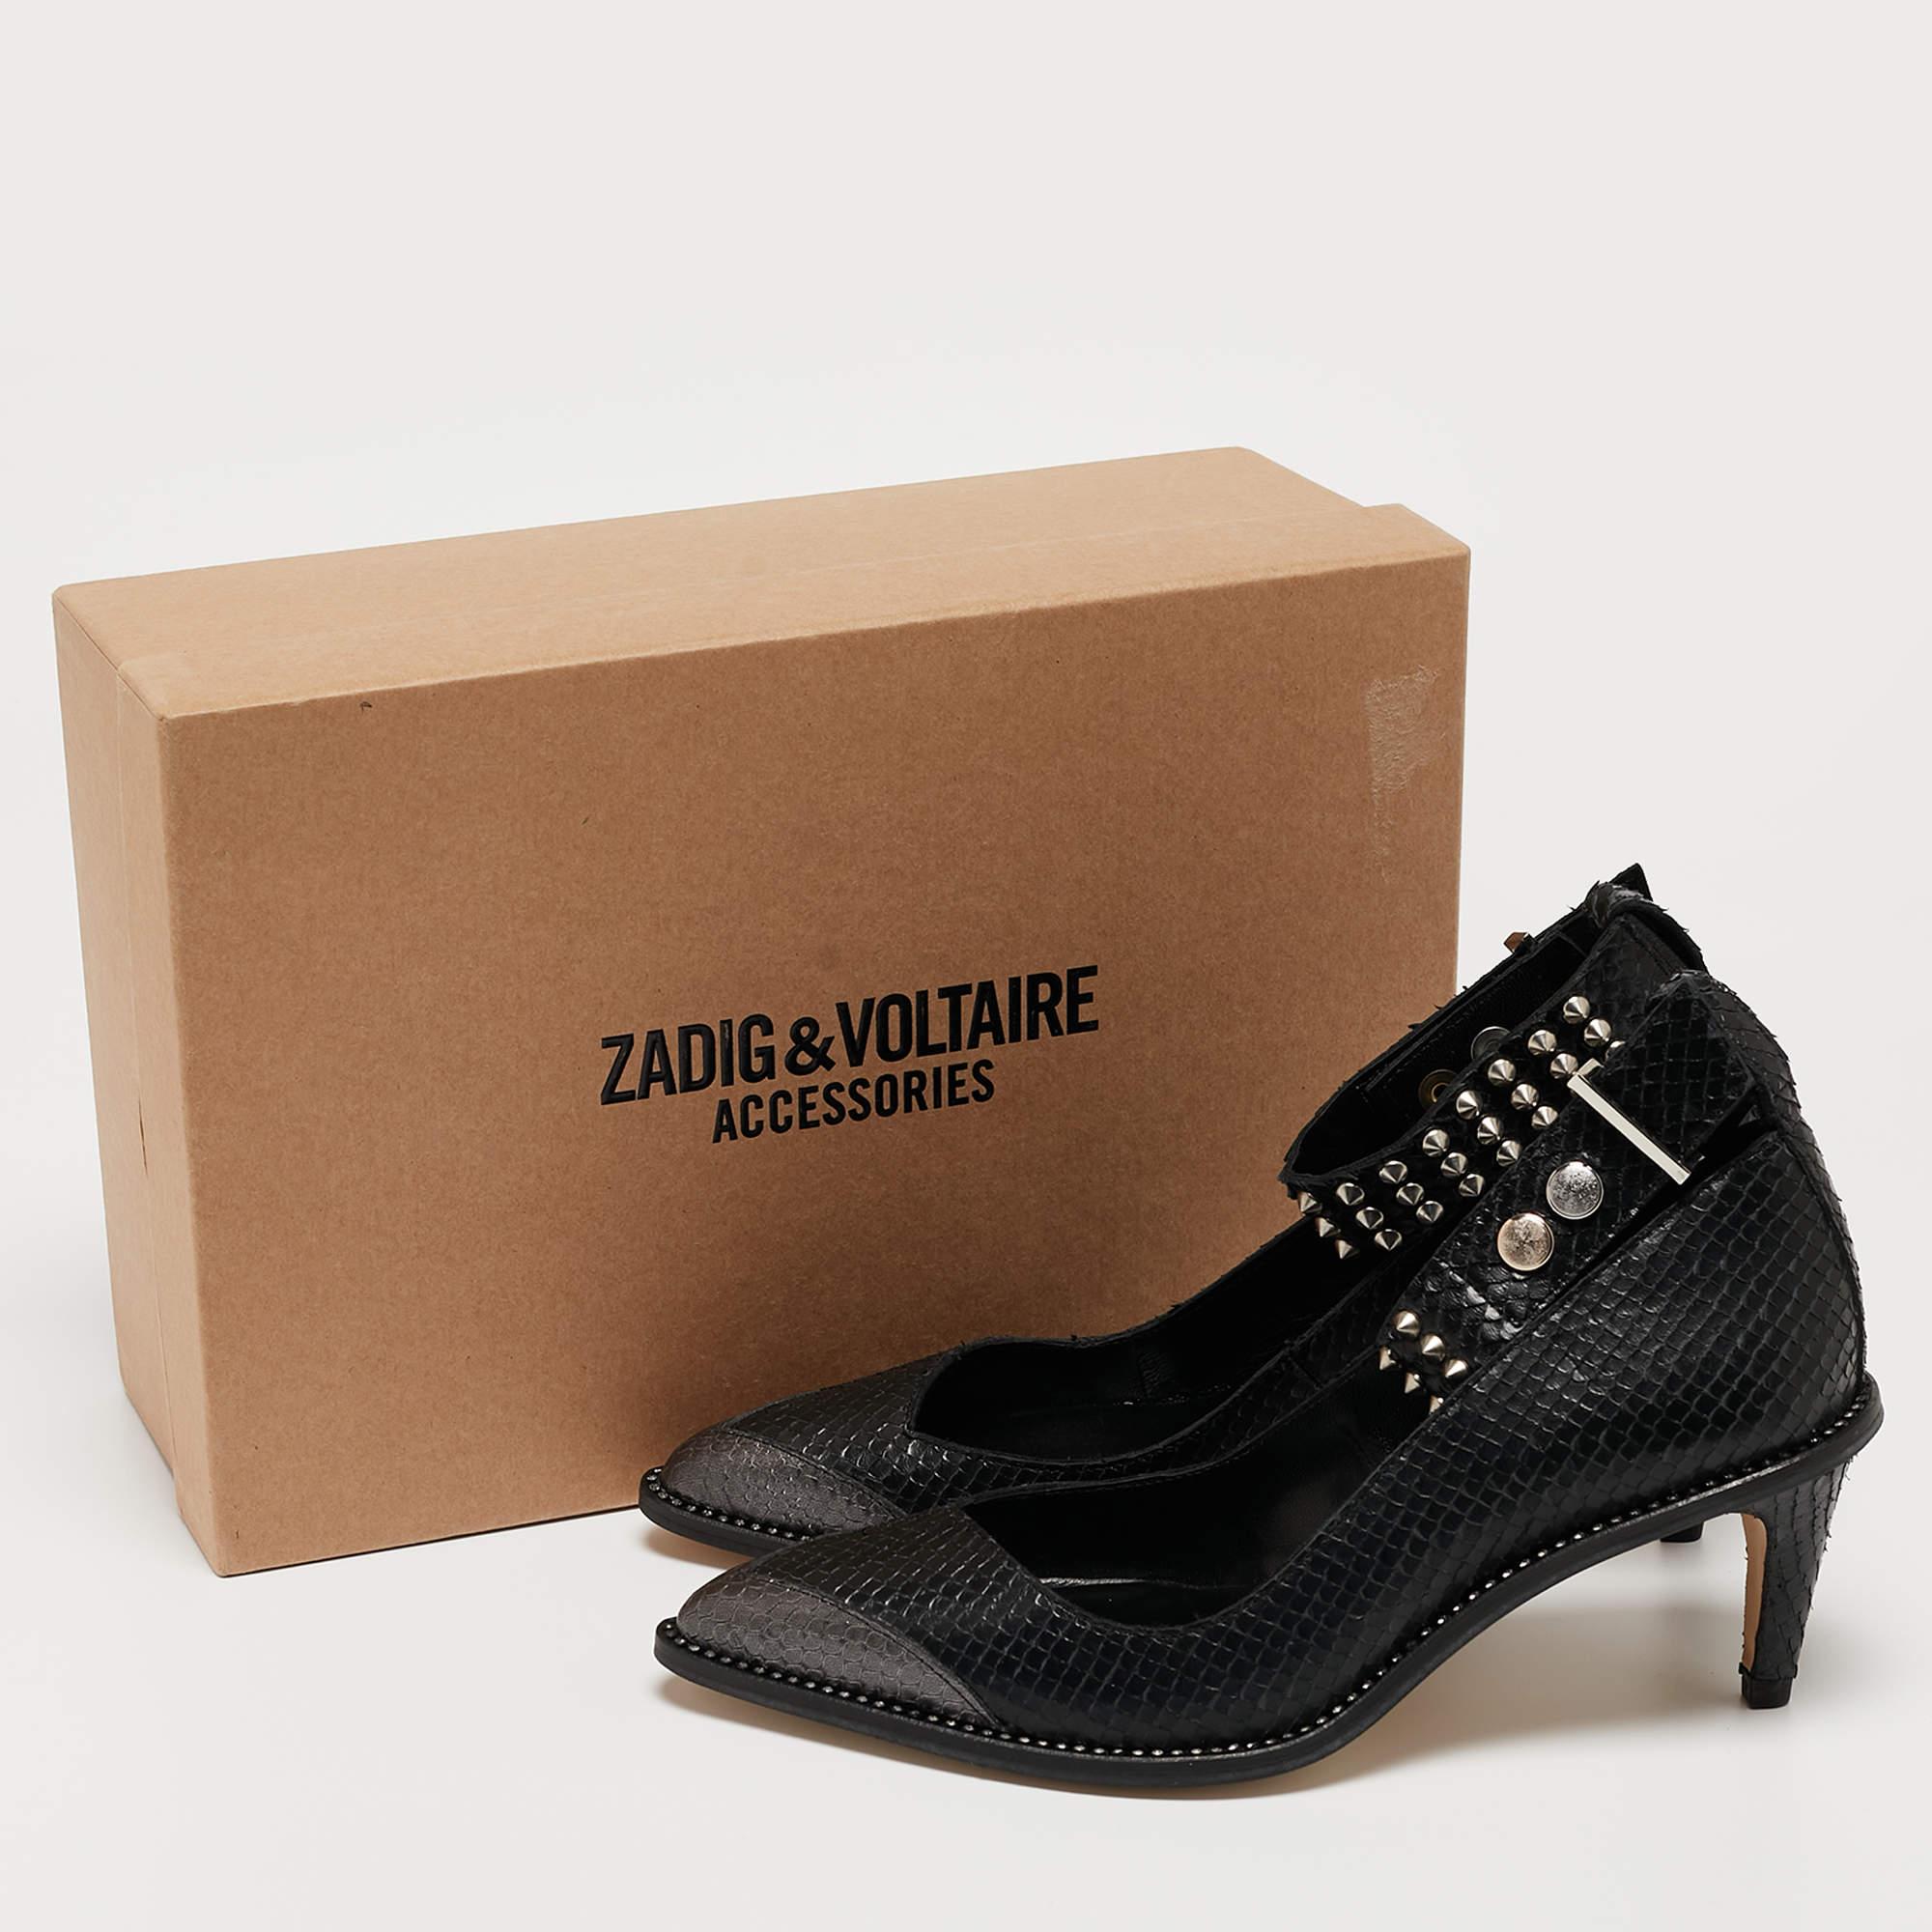 Zadig & Voltaire Black Python Embossed Leather Animal Print Pumps Size 36 For Sale 5